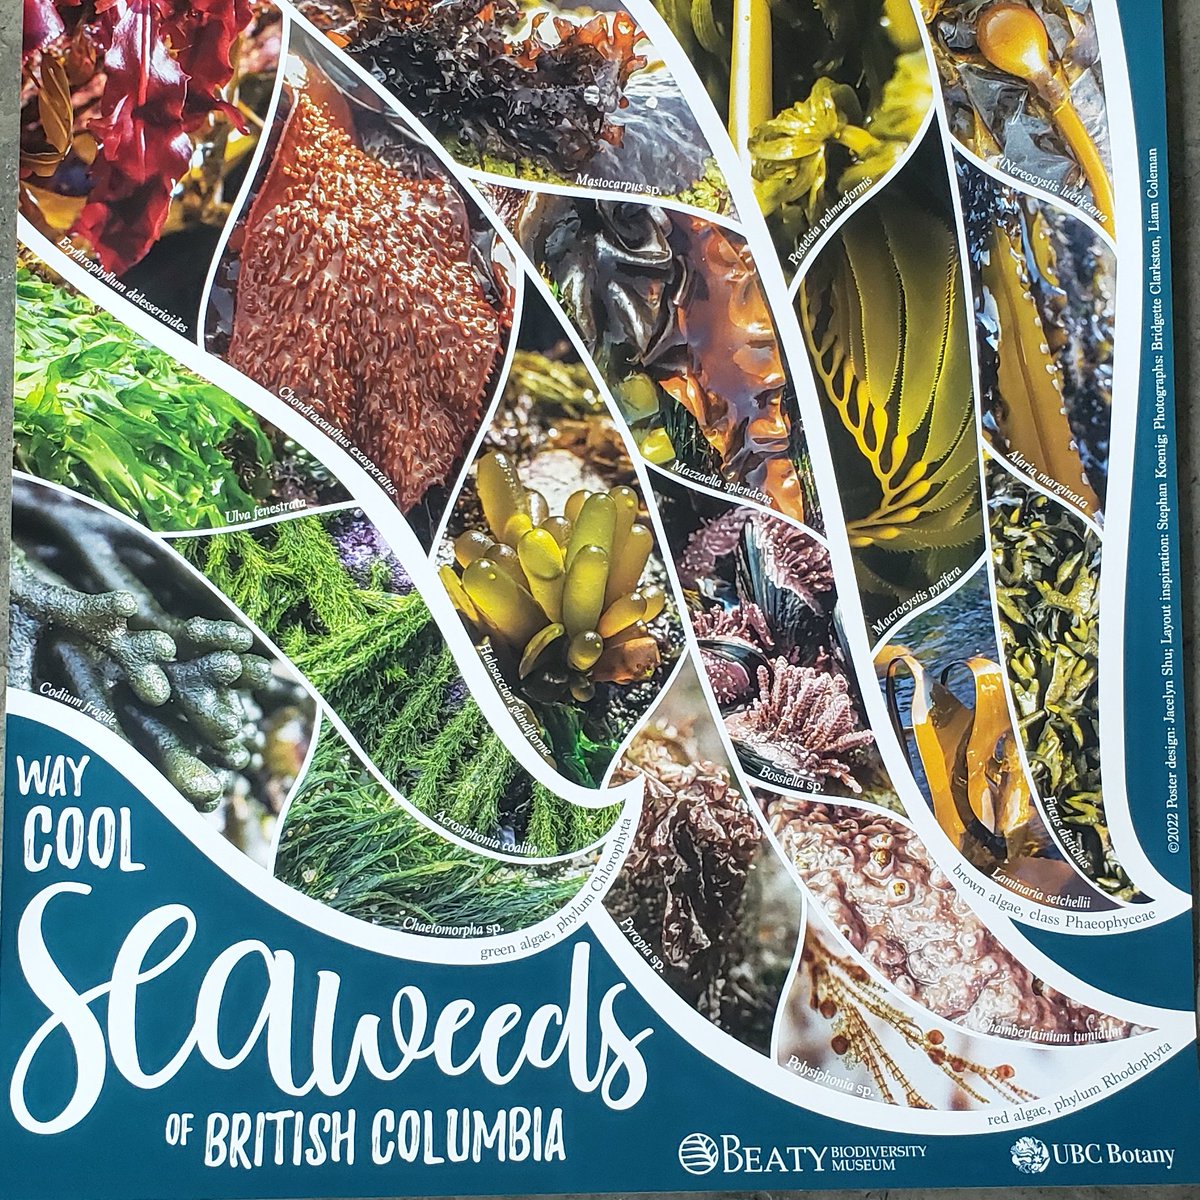 🚨Seaweed lovers, #kelp champions, and nature nerds at #IMPAC5 🚨

The talented Bridgette Clarkston @funnyfishes has kindly donated some of these 🤩 posters. I just left the last 6 at the @CANoceanlitCO booth. Get there quick if you want one!